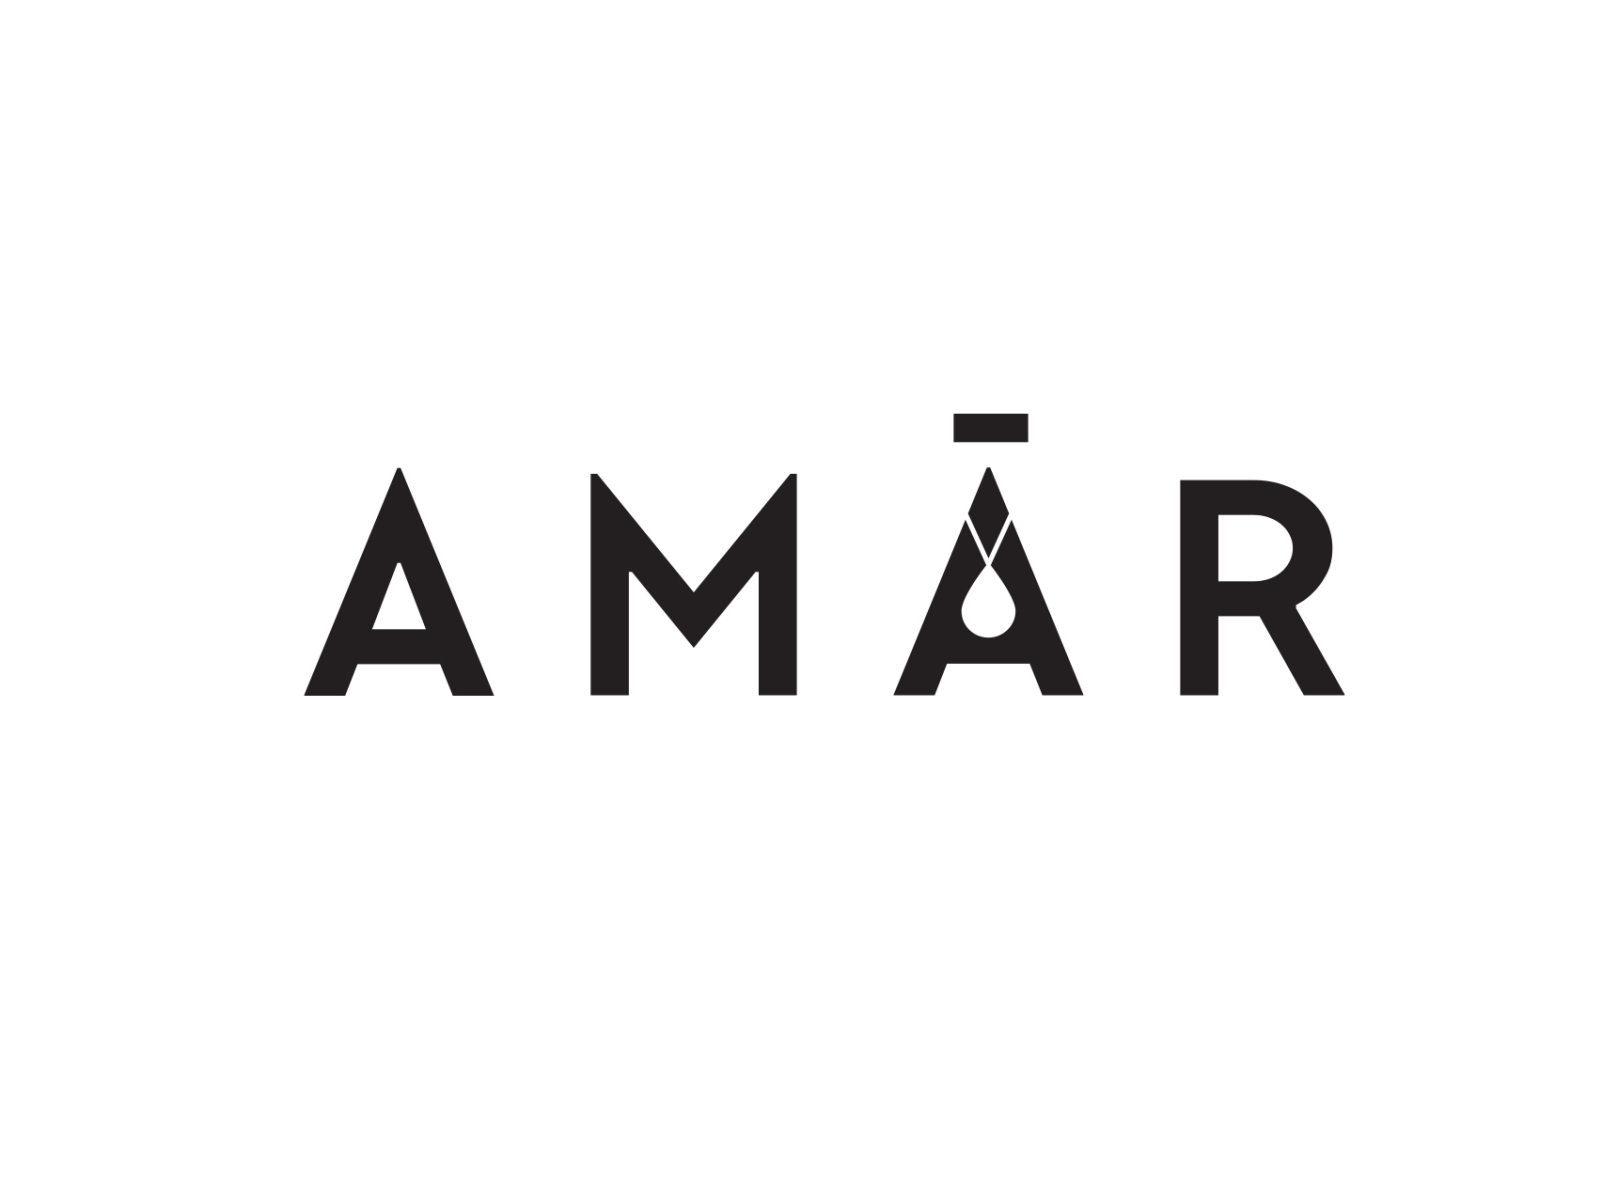 Amar by Andre28 on Dribbble